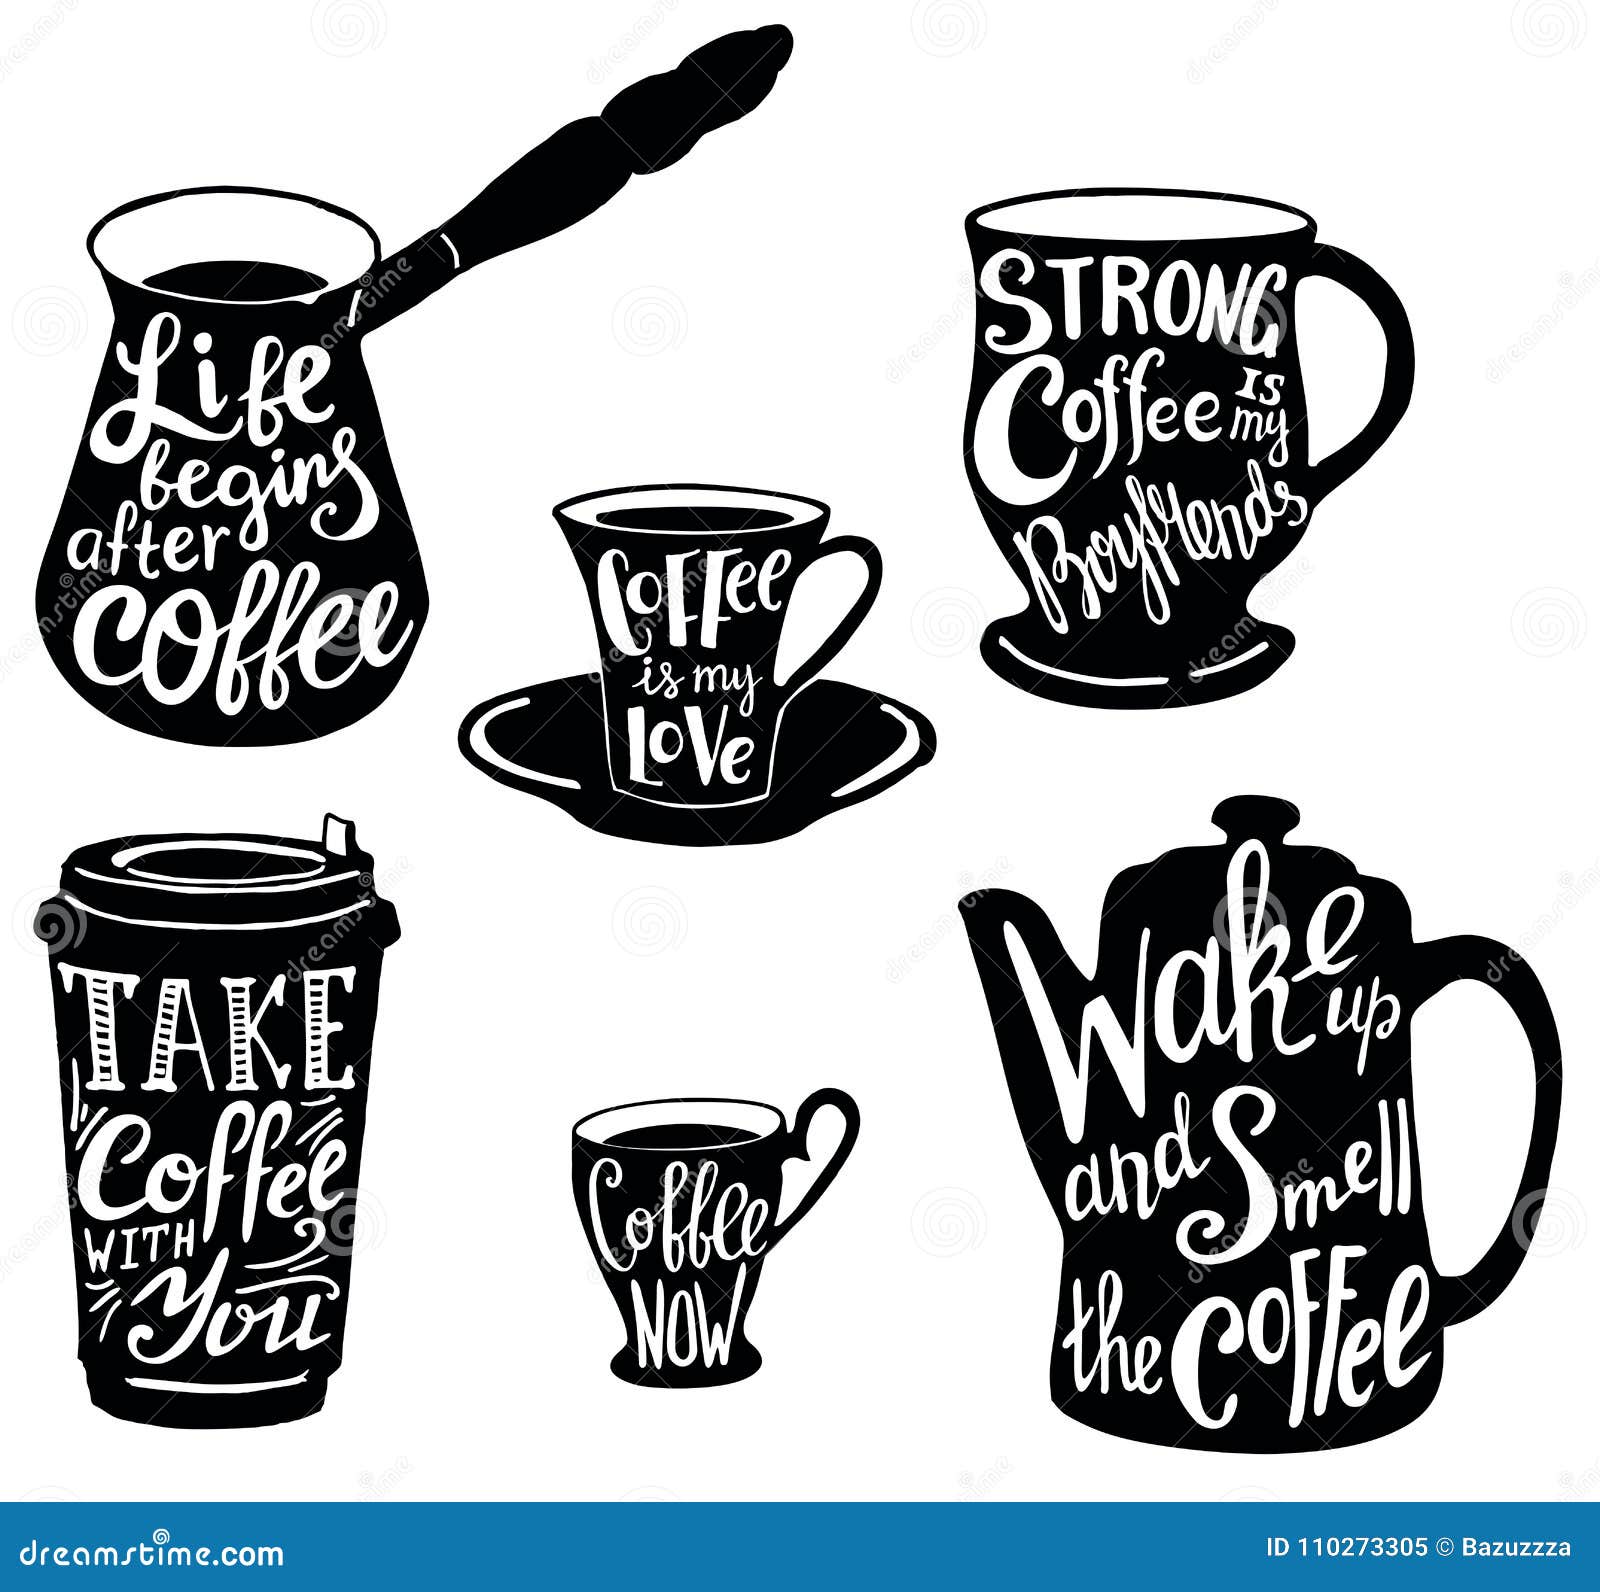 https://thumbs.dreamstime.com/z/vector-coffee-set-cute-coffee-quotes-sayings-calligraphic-handwritten-short-phrases-coffee-vintage-creative-110273305.jpg